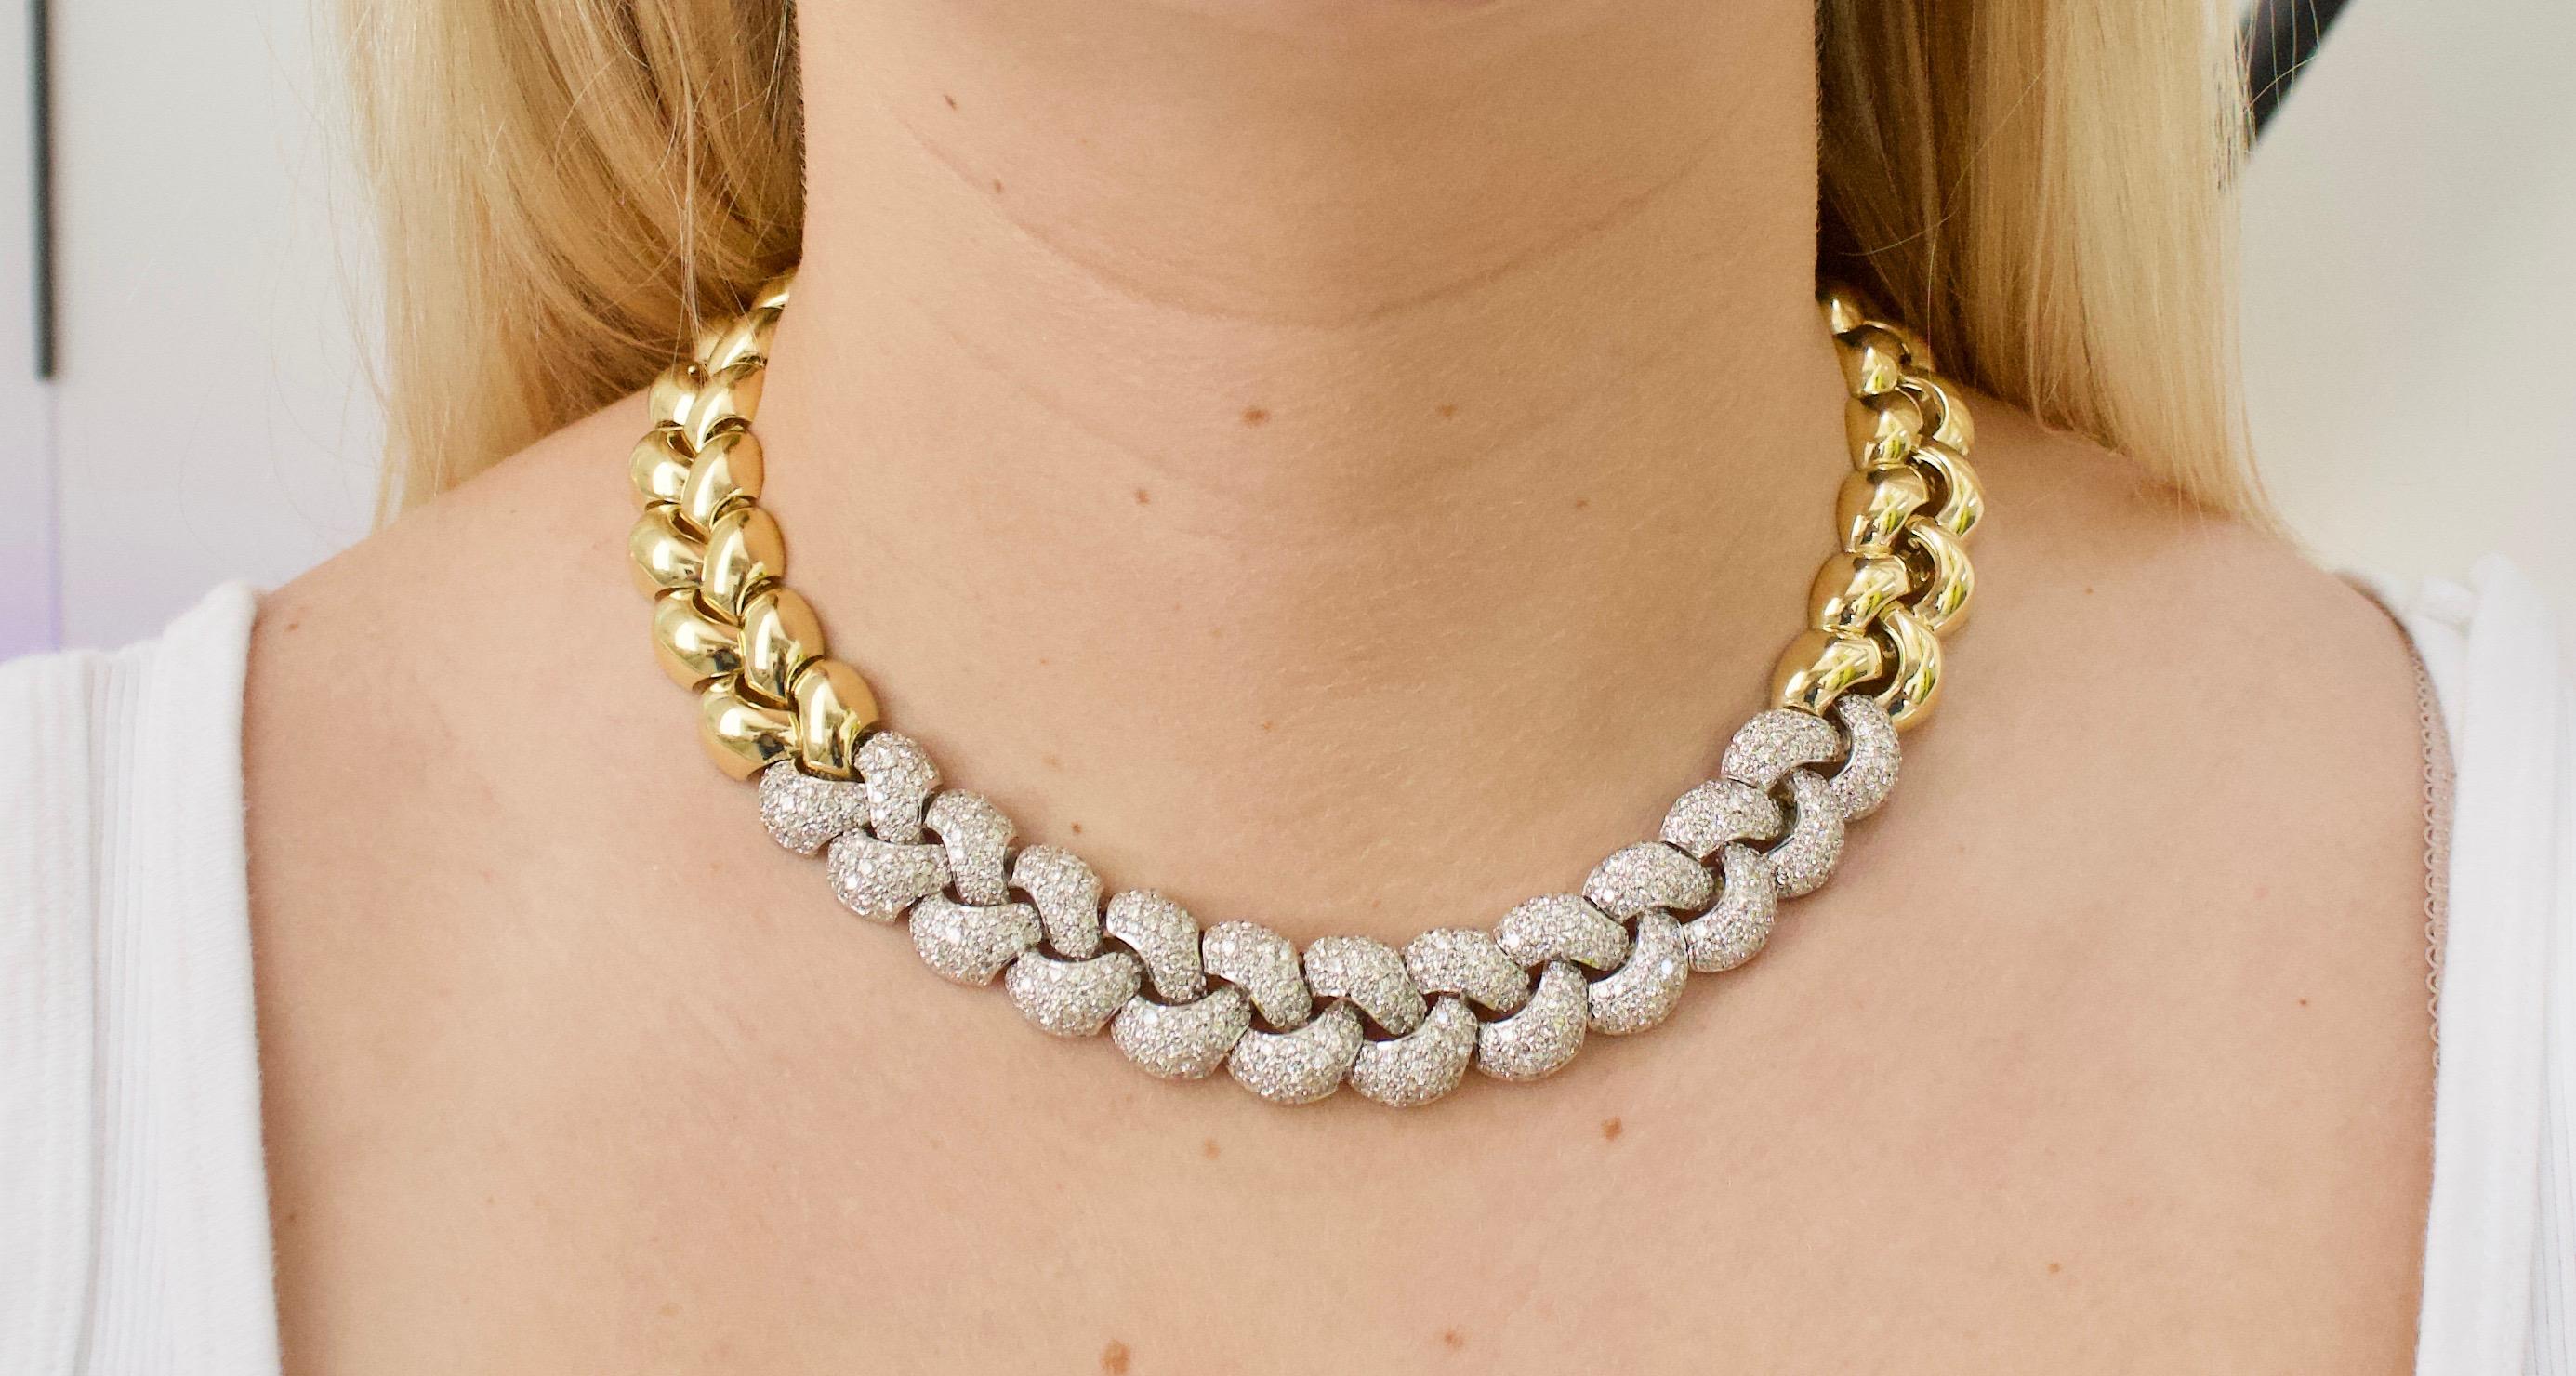 Heavy Important Diamond 18k Yellow Gold Décolletage Necklace 28.75 Cts. 4.75 oz In Excellent Condition For Sale In Wailea, HI